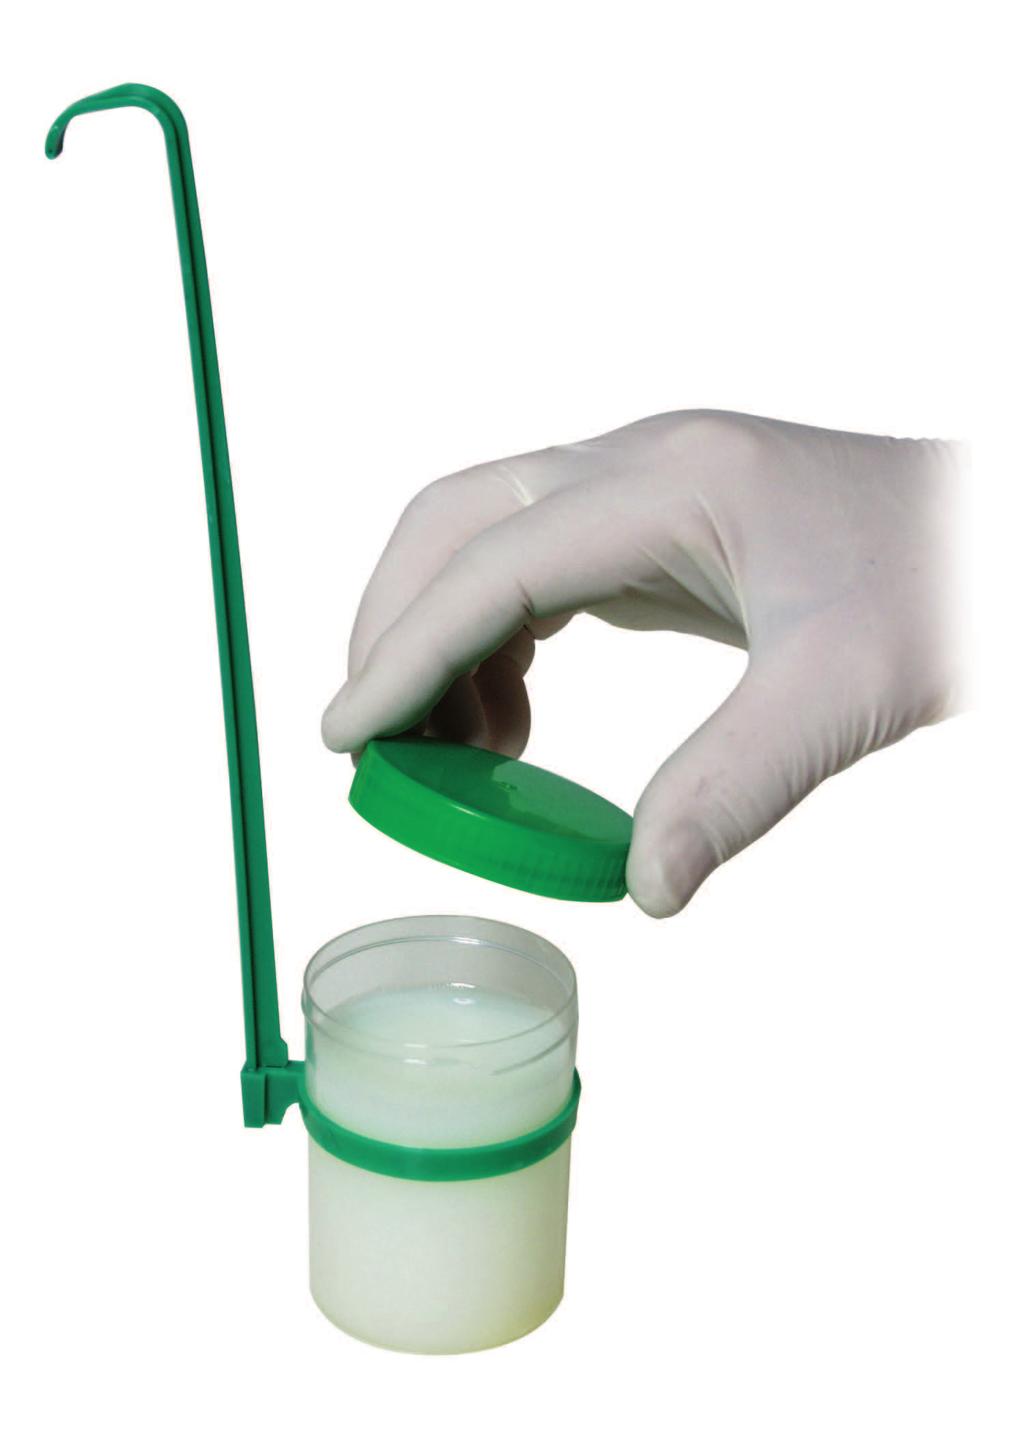 DIPPA SAMPLER SAMPLING BOTTLE WITH REMOVABLE HANDLE Ideal for liquid sampling Beta irradiated, available with 200 ml and 60 ml capacity Individually wrapped Shatterproof polypropylene bottle,